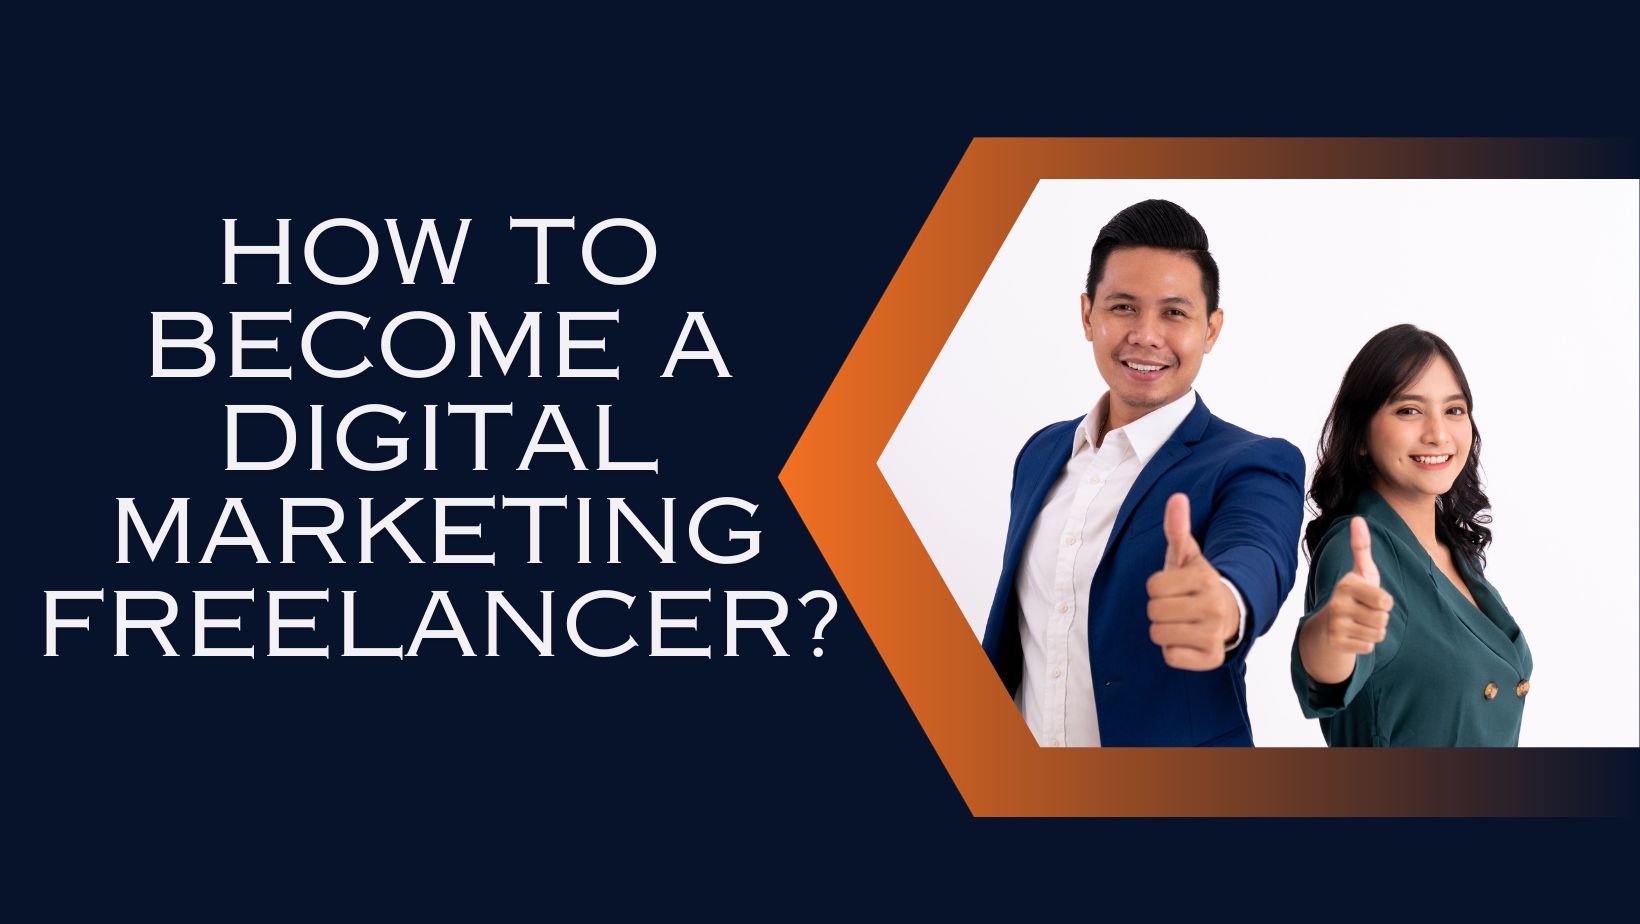 How to Become a Digital Marketing Freelancer? A Step-by-Step Guide